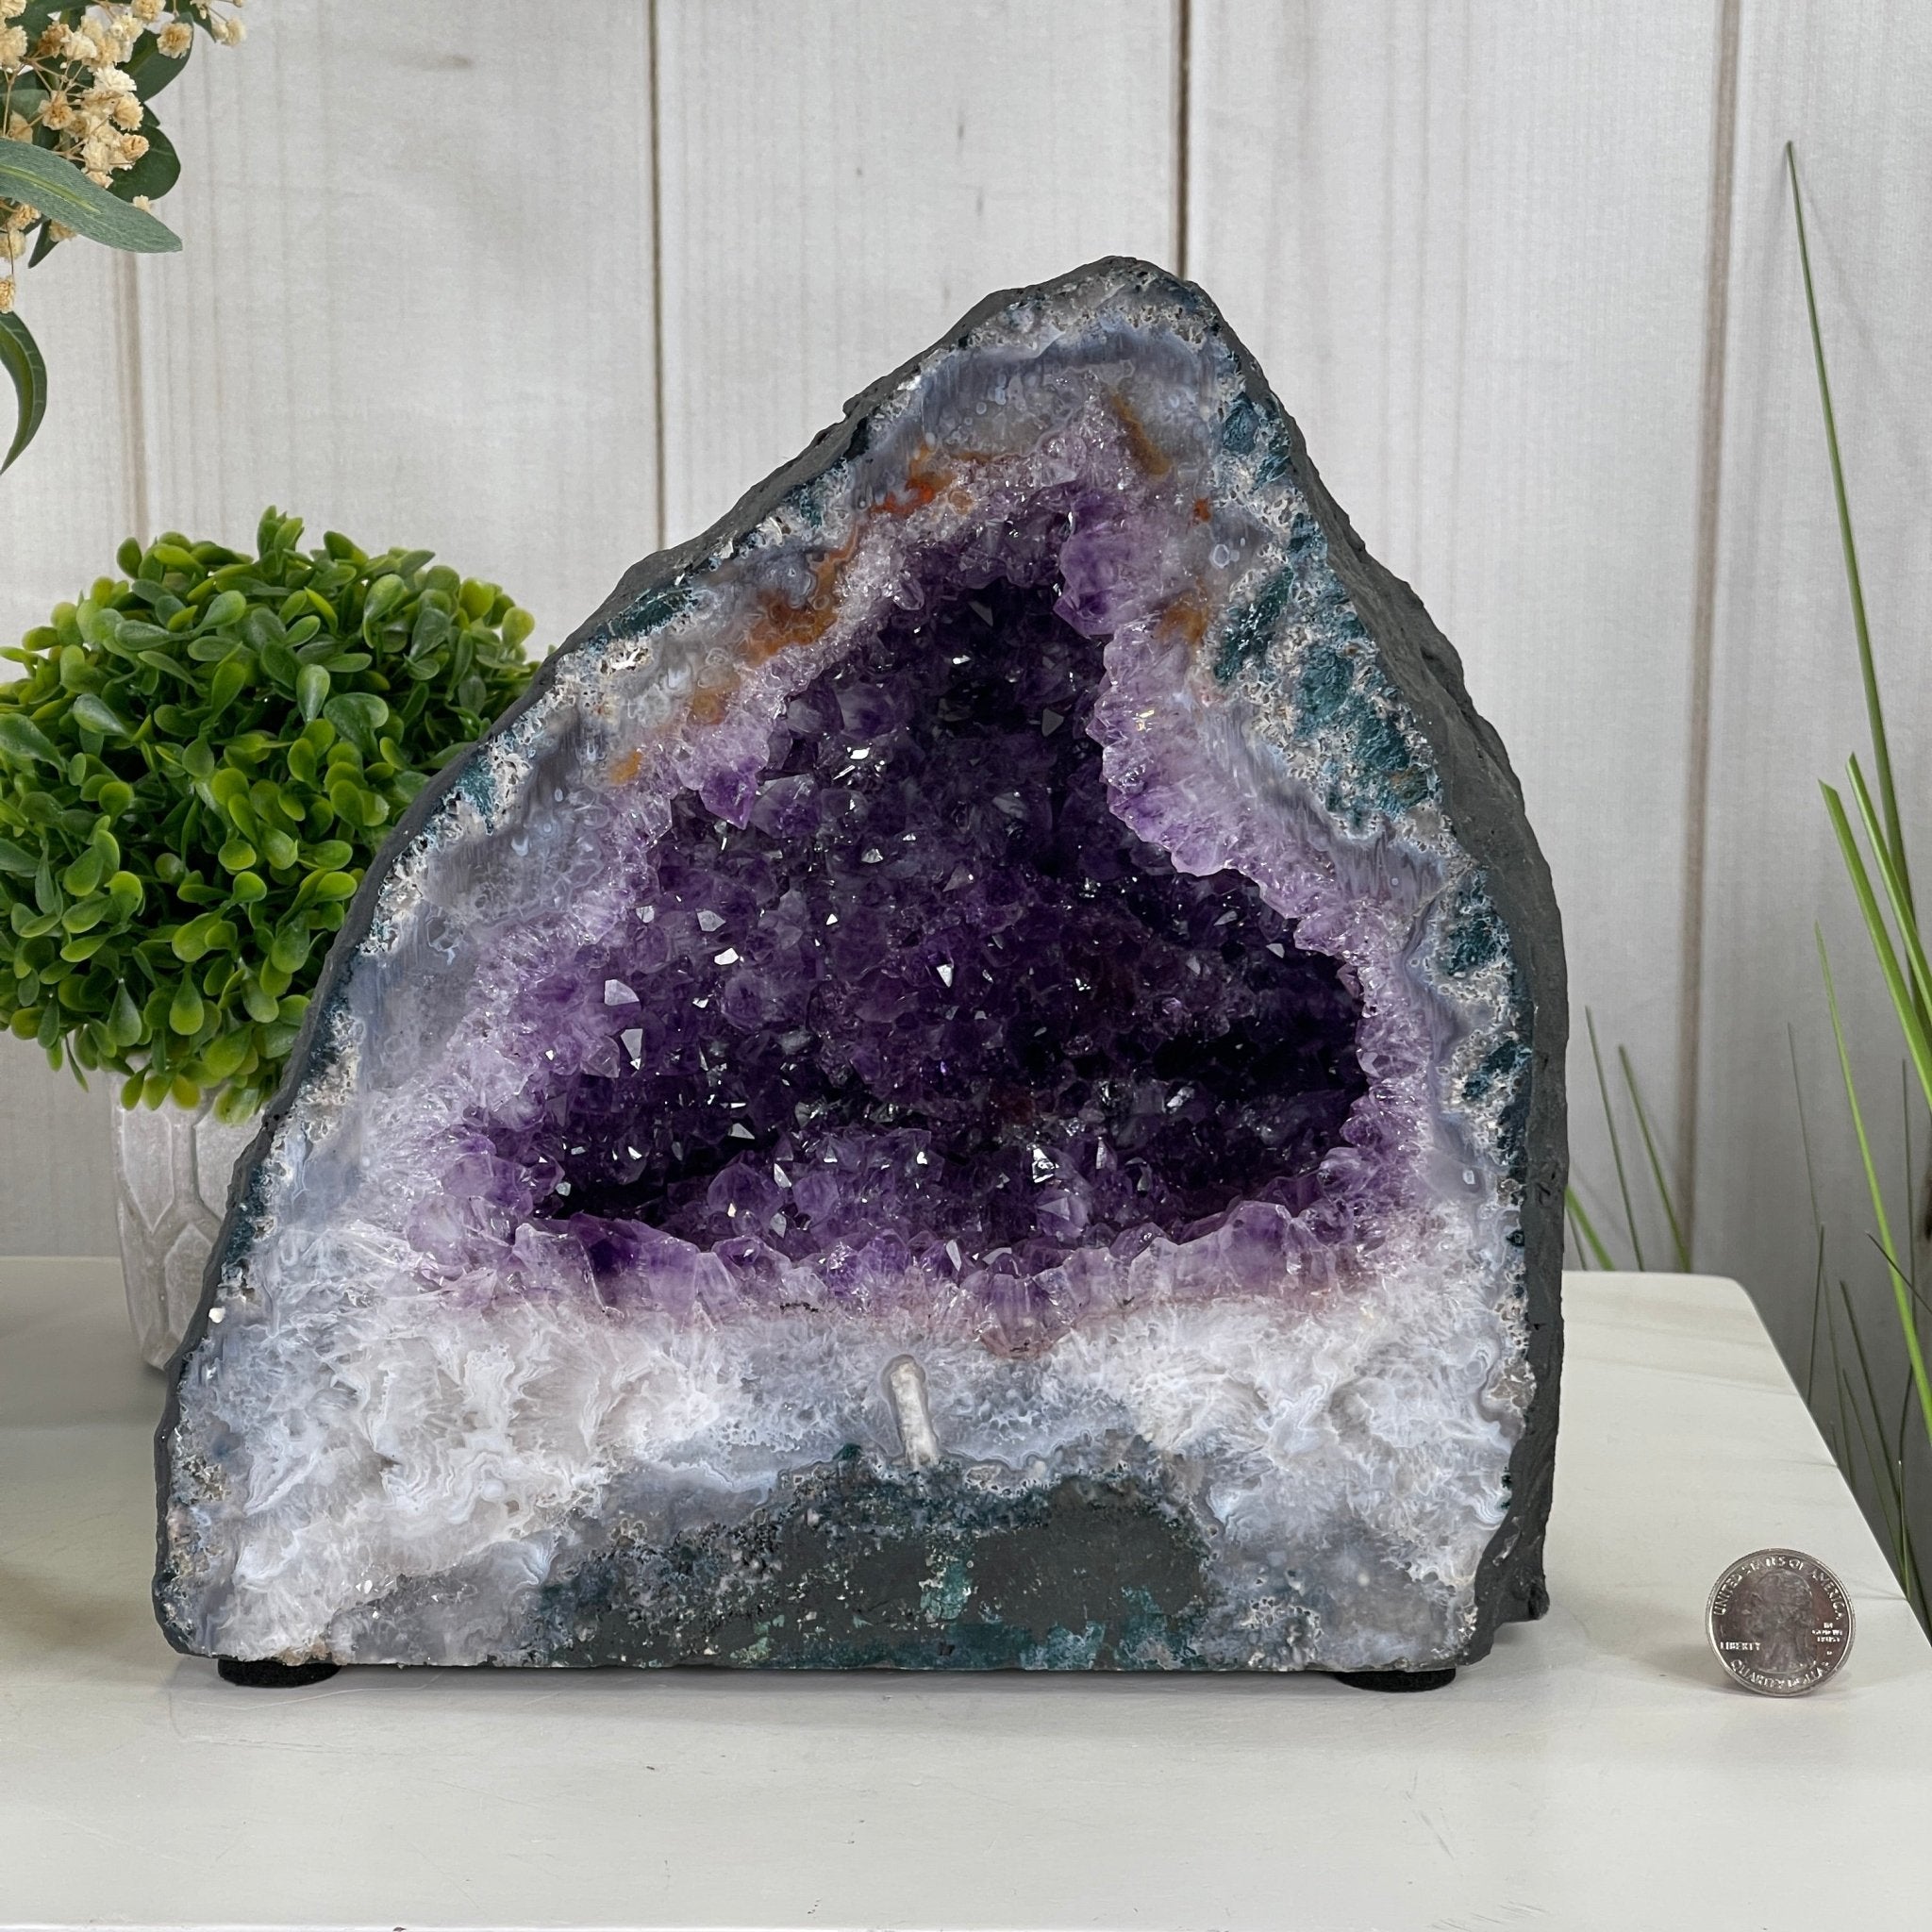 Extra Quality Brazilian Amethyst Cathedral, 9.1” tall & 19.7 lbs #5601-0581 by Brazil Gems - Brazil GemsBrazil GemsExtra Quality Brazilian Amethyst Cathedral, 9.1” tall & 19.7 lbs #5601-0581 by Brazil GemsCathedrals5601-0581